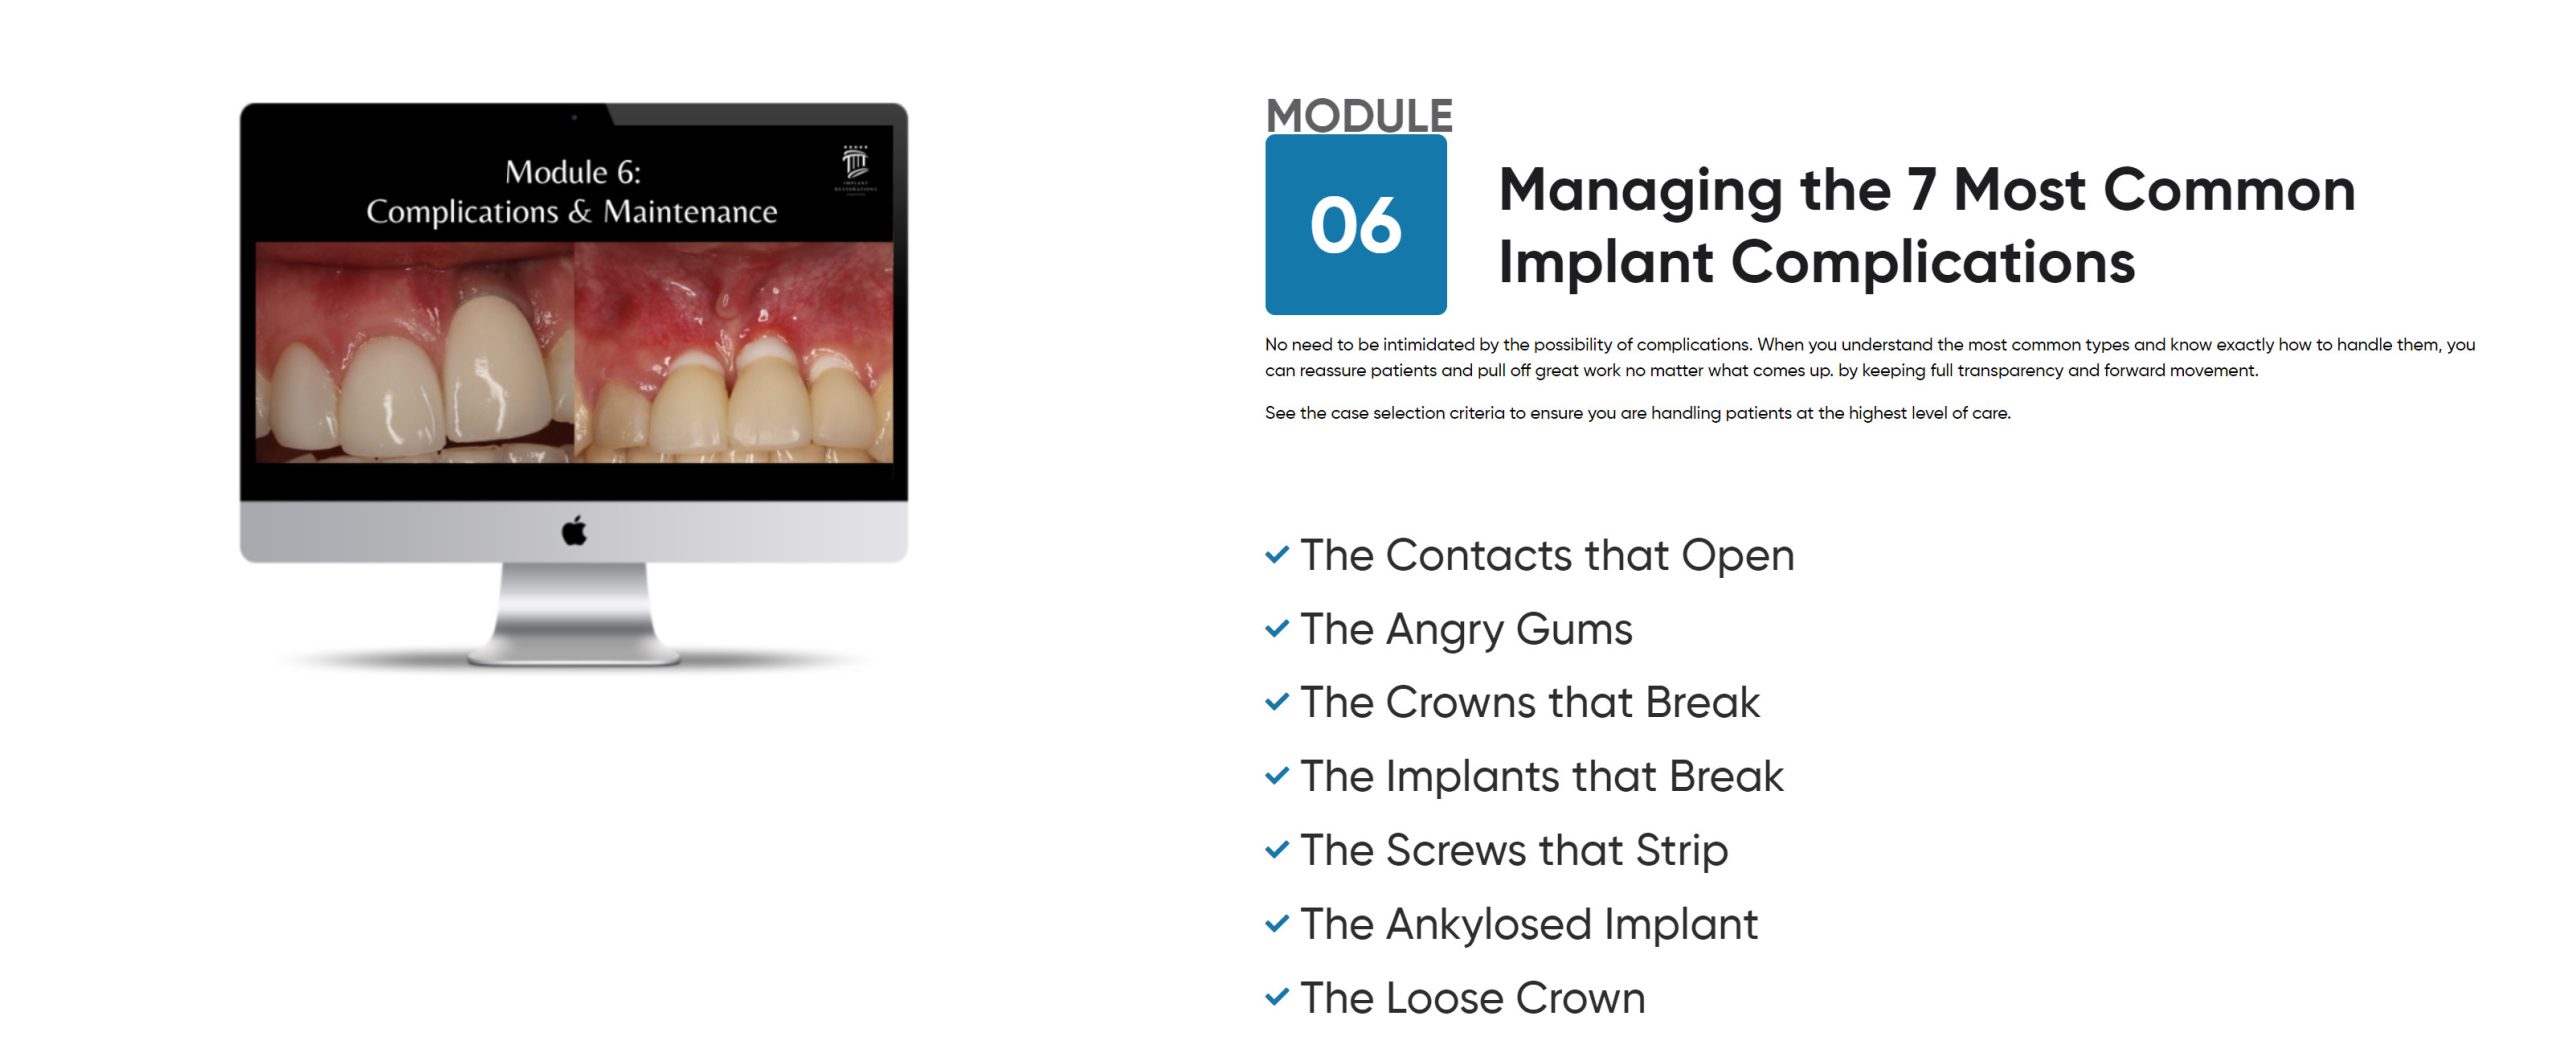 Managing the 7 Most Common Implant Complications